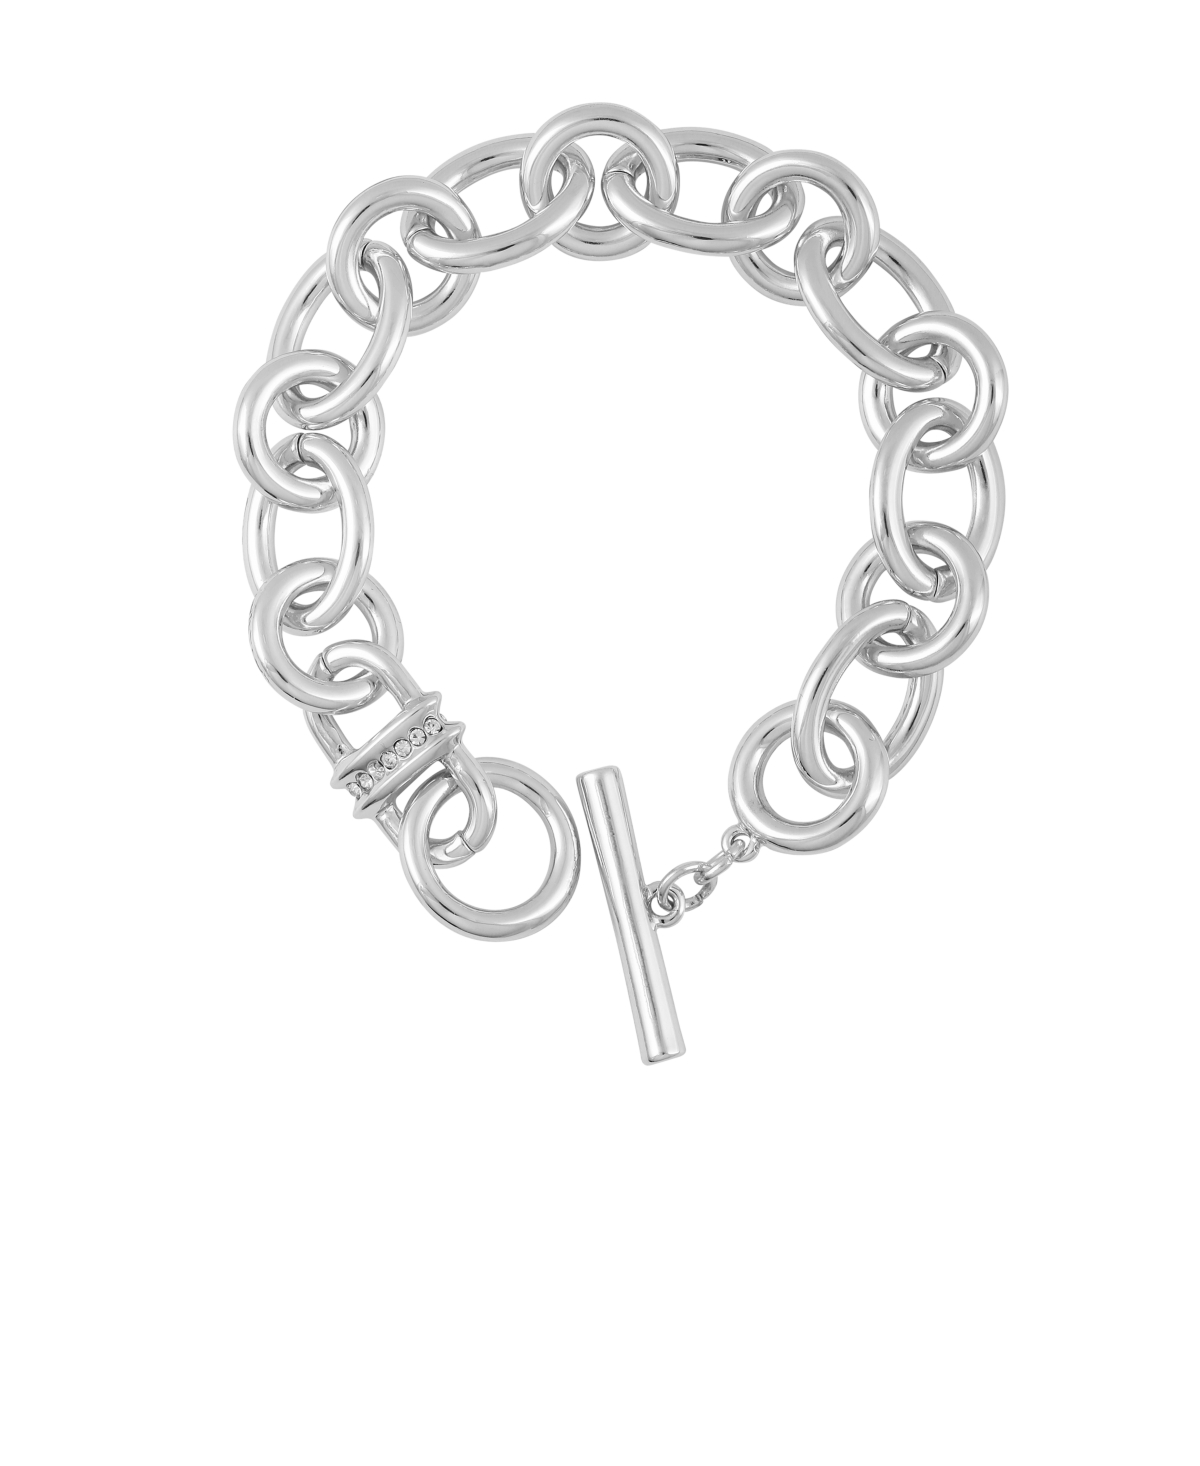 Chain Link Toggle Bracelet - Silver